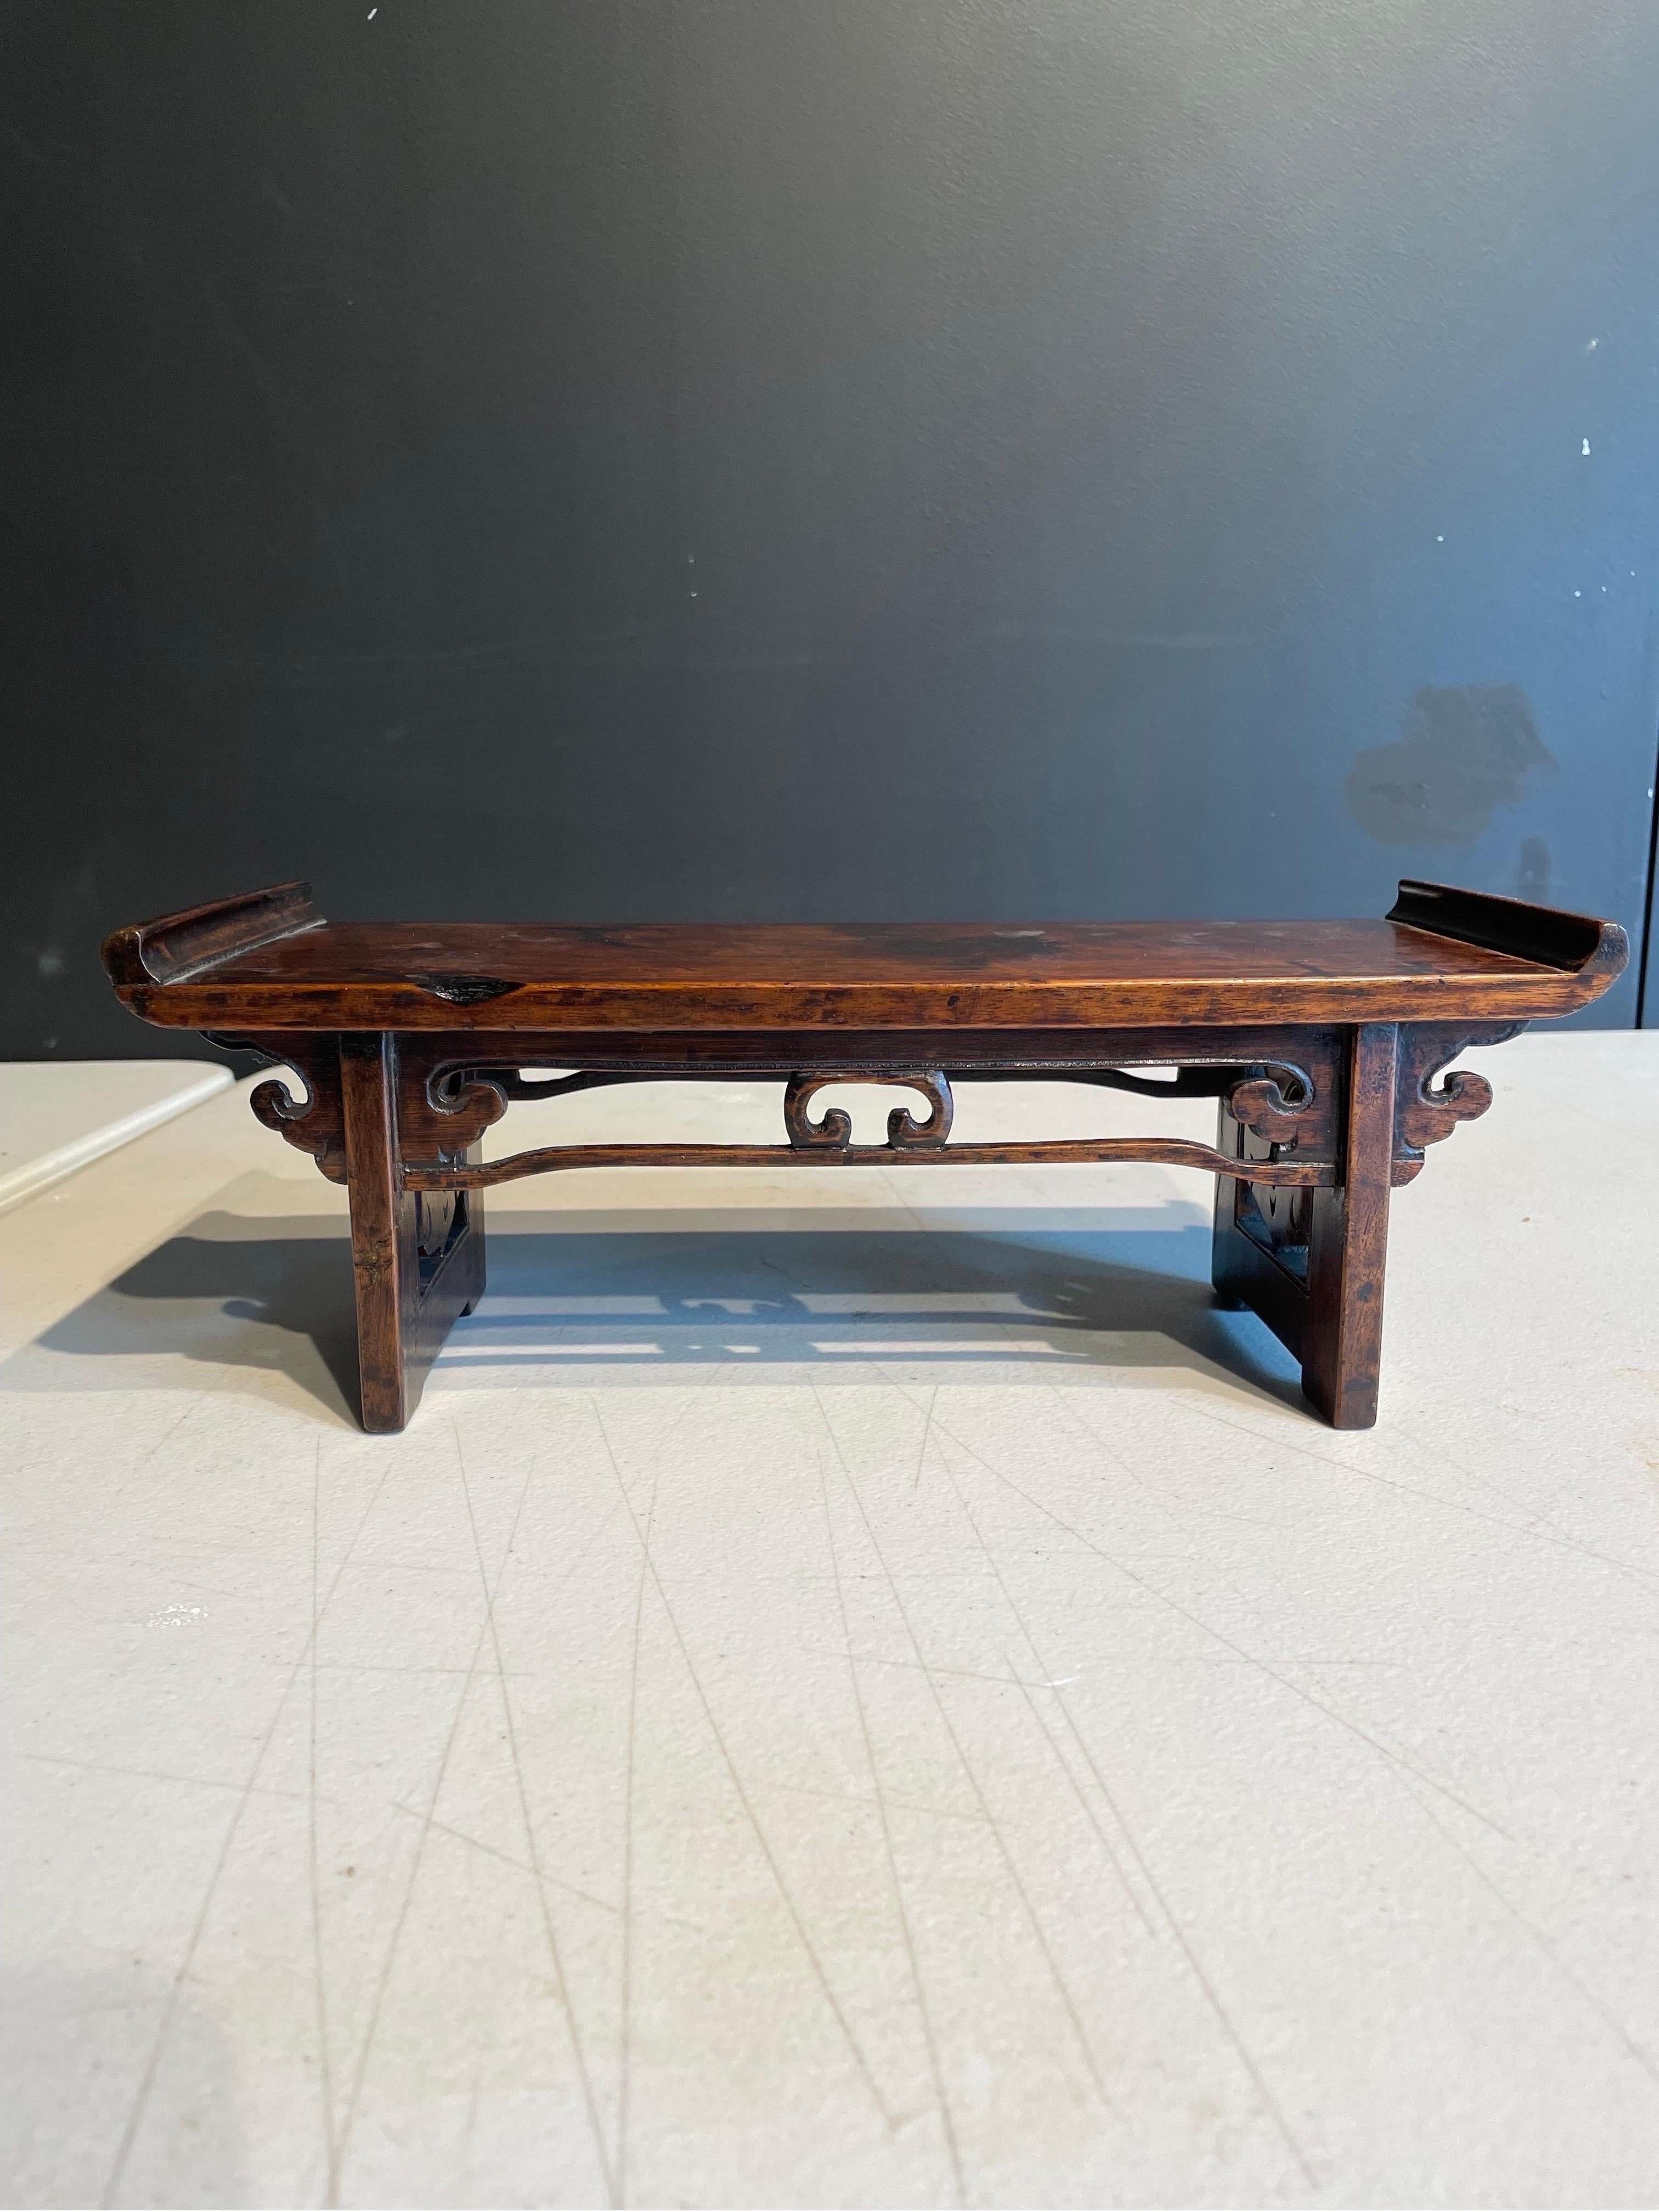 A Chinese Hardwood Miniature Table Form Stand, Late 19th century

Dimension: Height: 11.5 cm Length: 32 cm. Depth: 12 cm.

Provenance: Old Melbourne Chinese Collection.